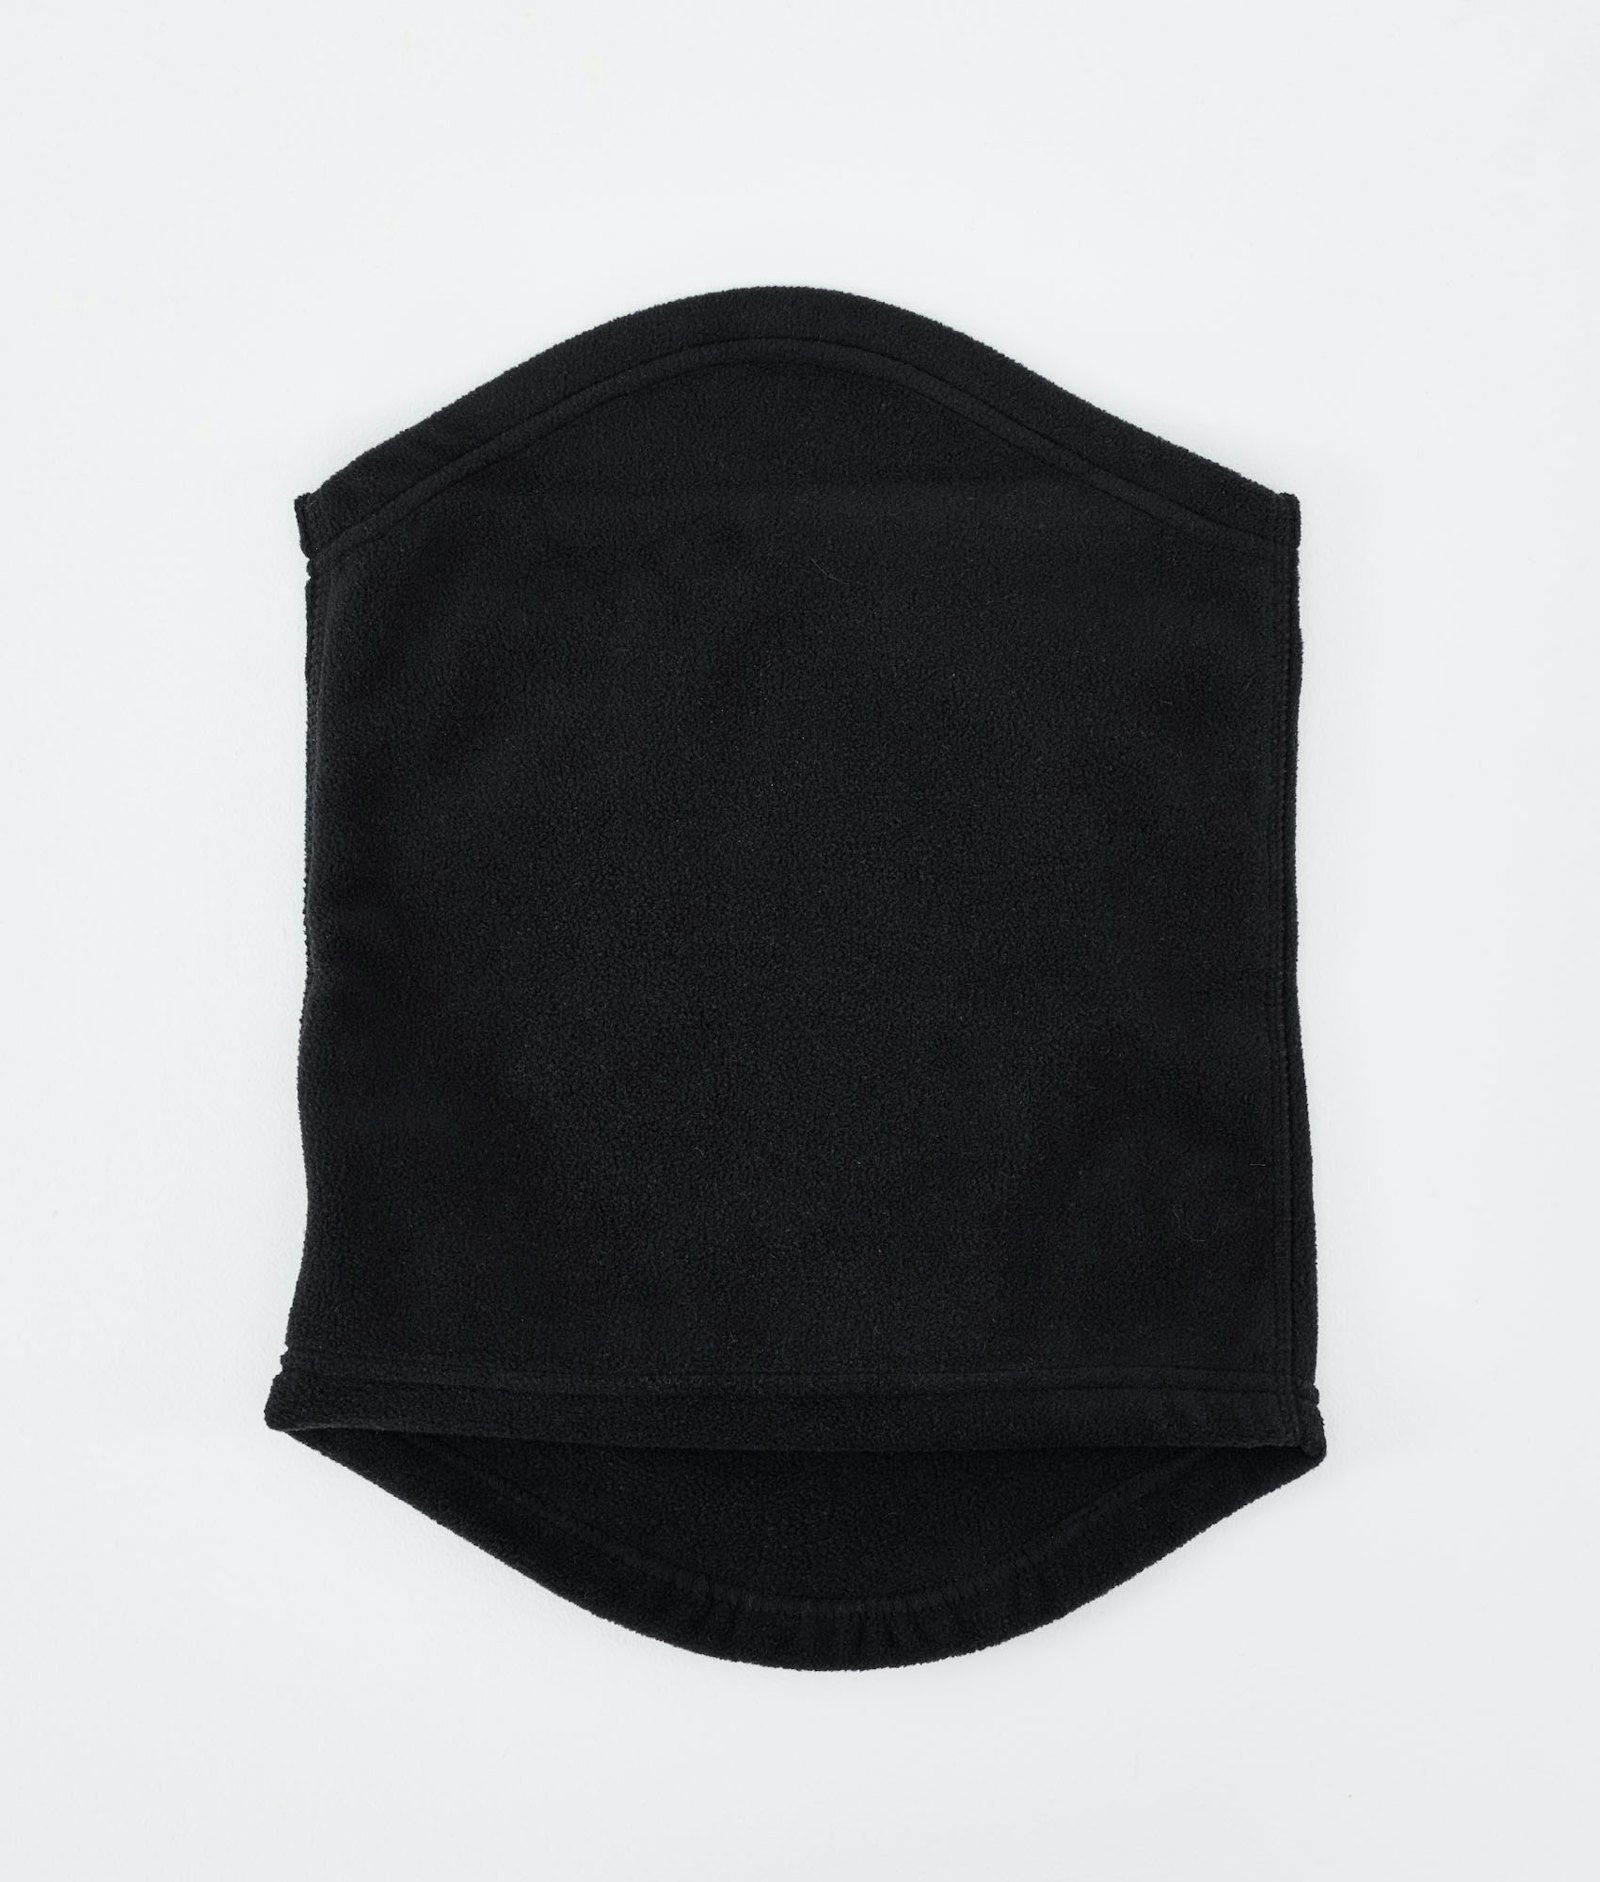 Dope Cozy Tube 2021 Facemask Black, Image 2 of 6